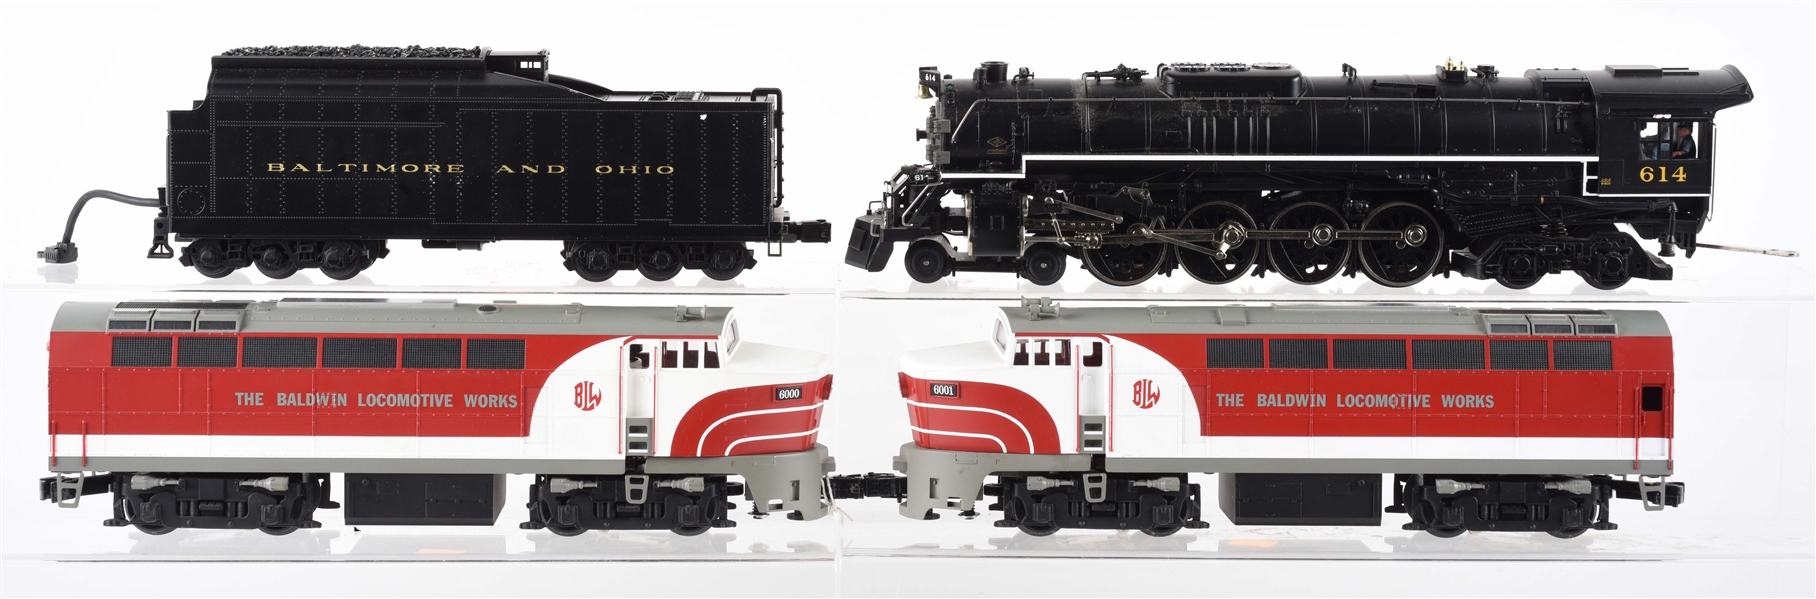 LOT OF 4: WILLIAMS 6001, 6000, 614 TRAINS. 